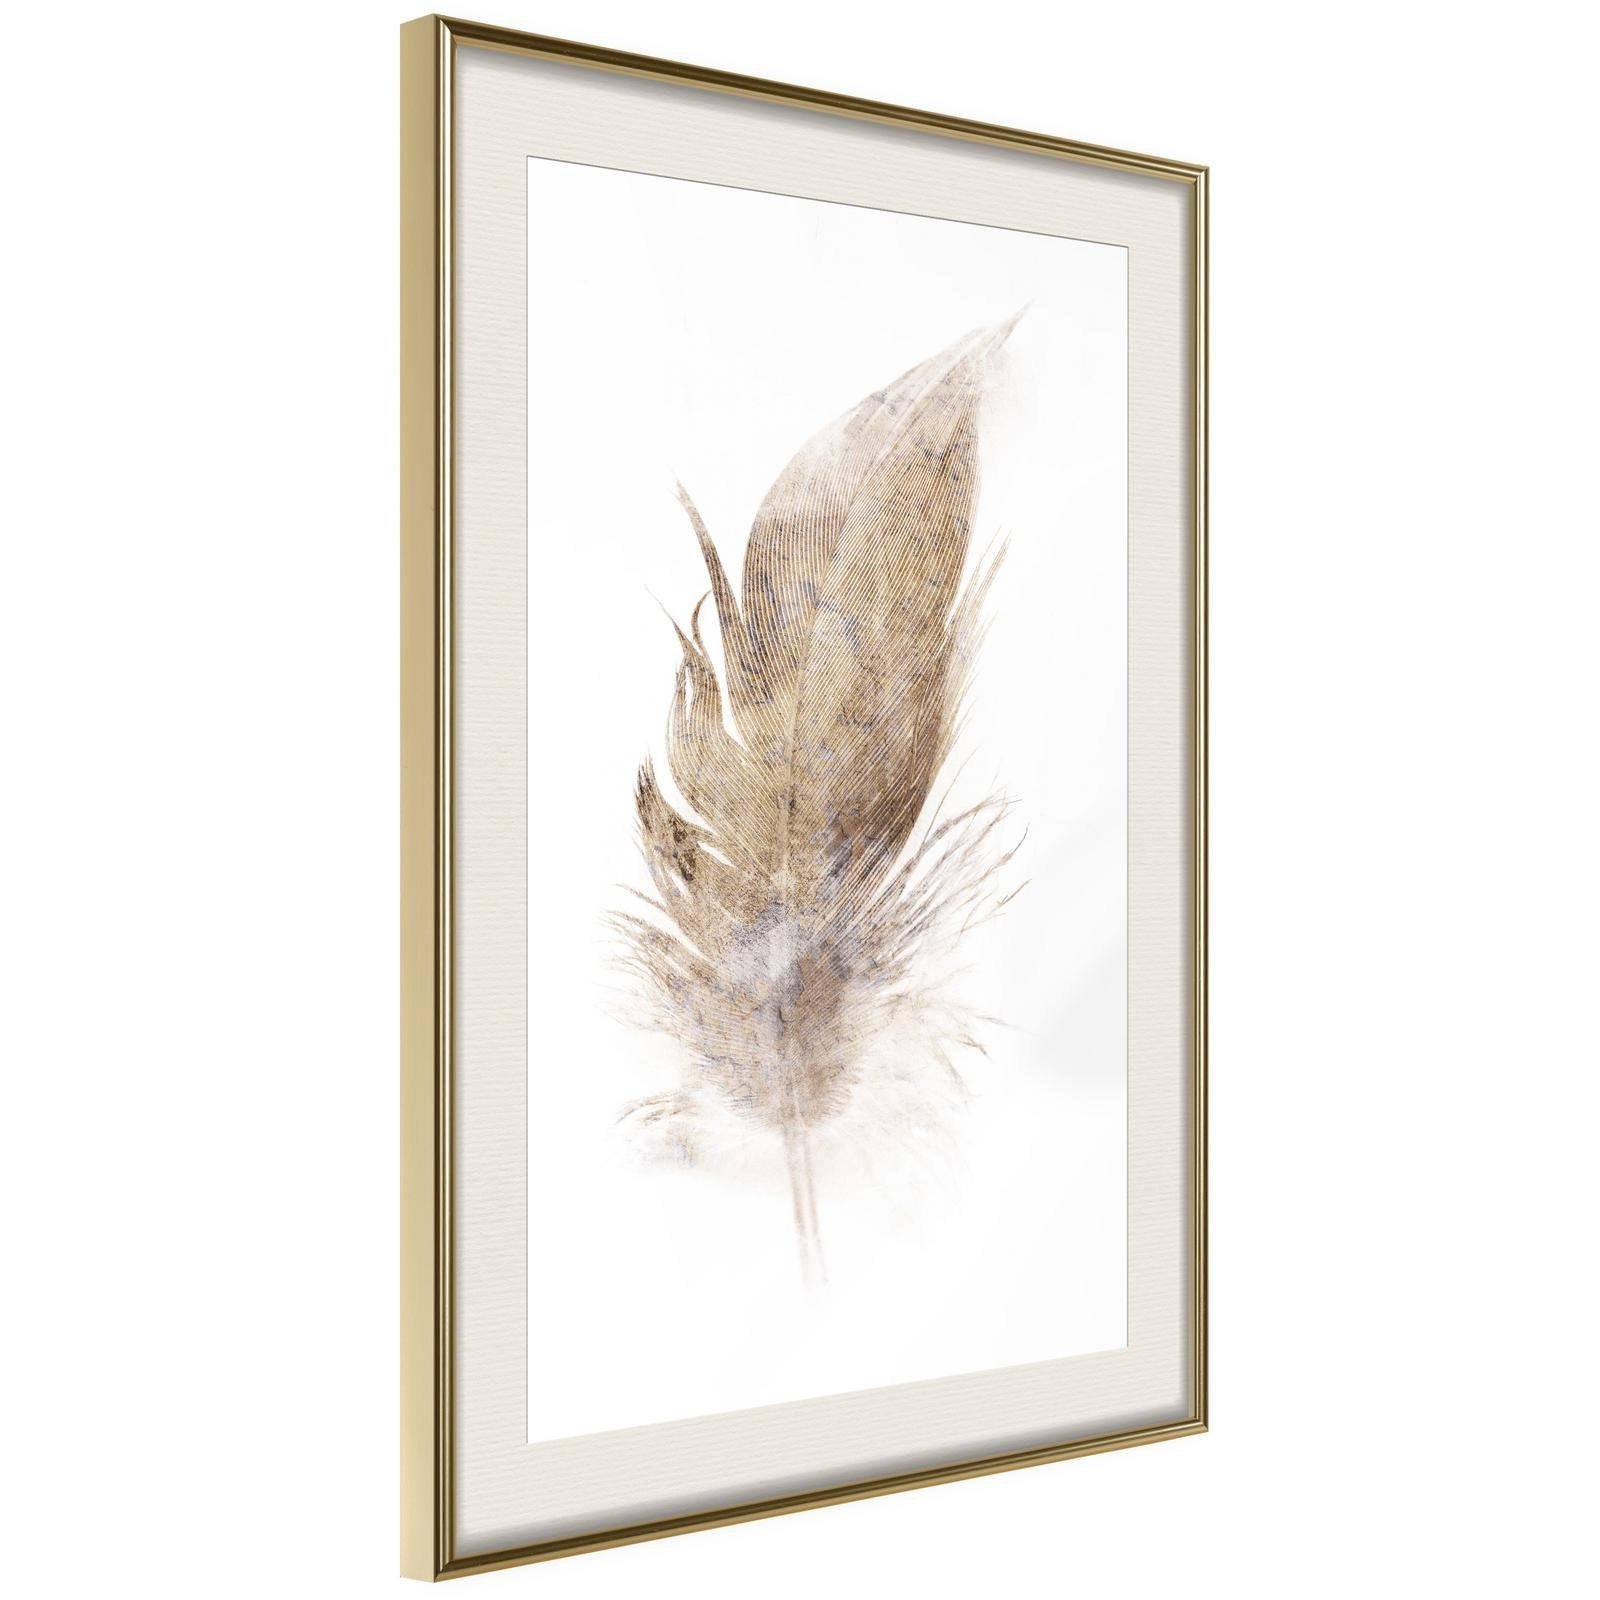 Inramad Poster / Tavla - Lost Feather (Beige)-Poster Inramad-Artgeist-20x30-Guldram med passepartout-peaceofhome.se